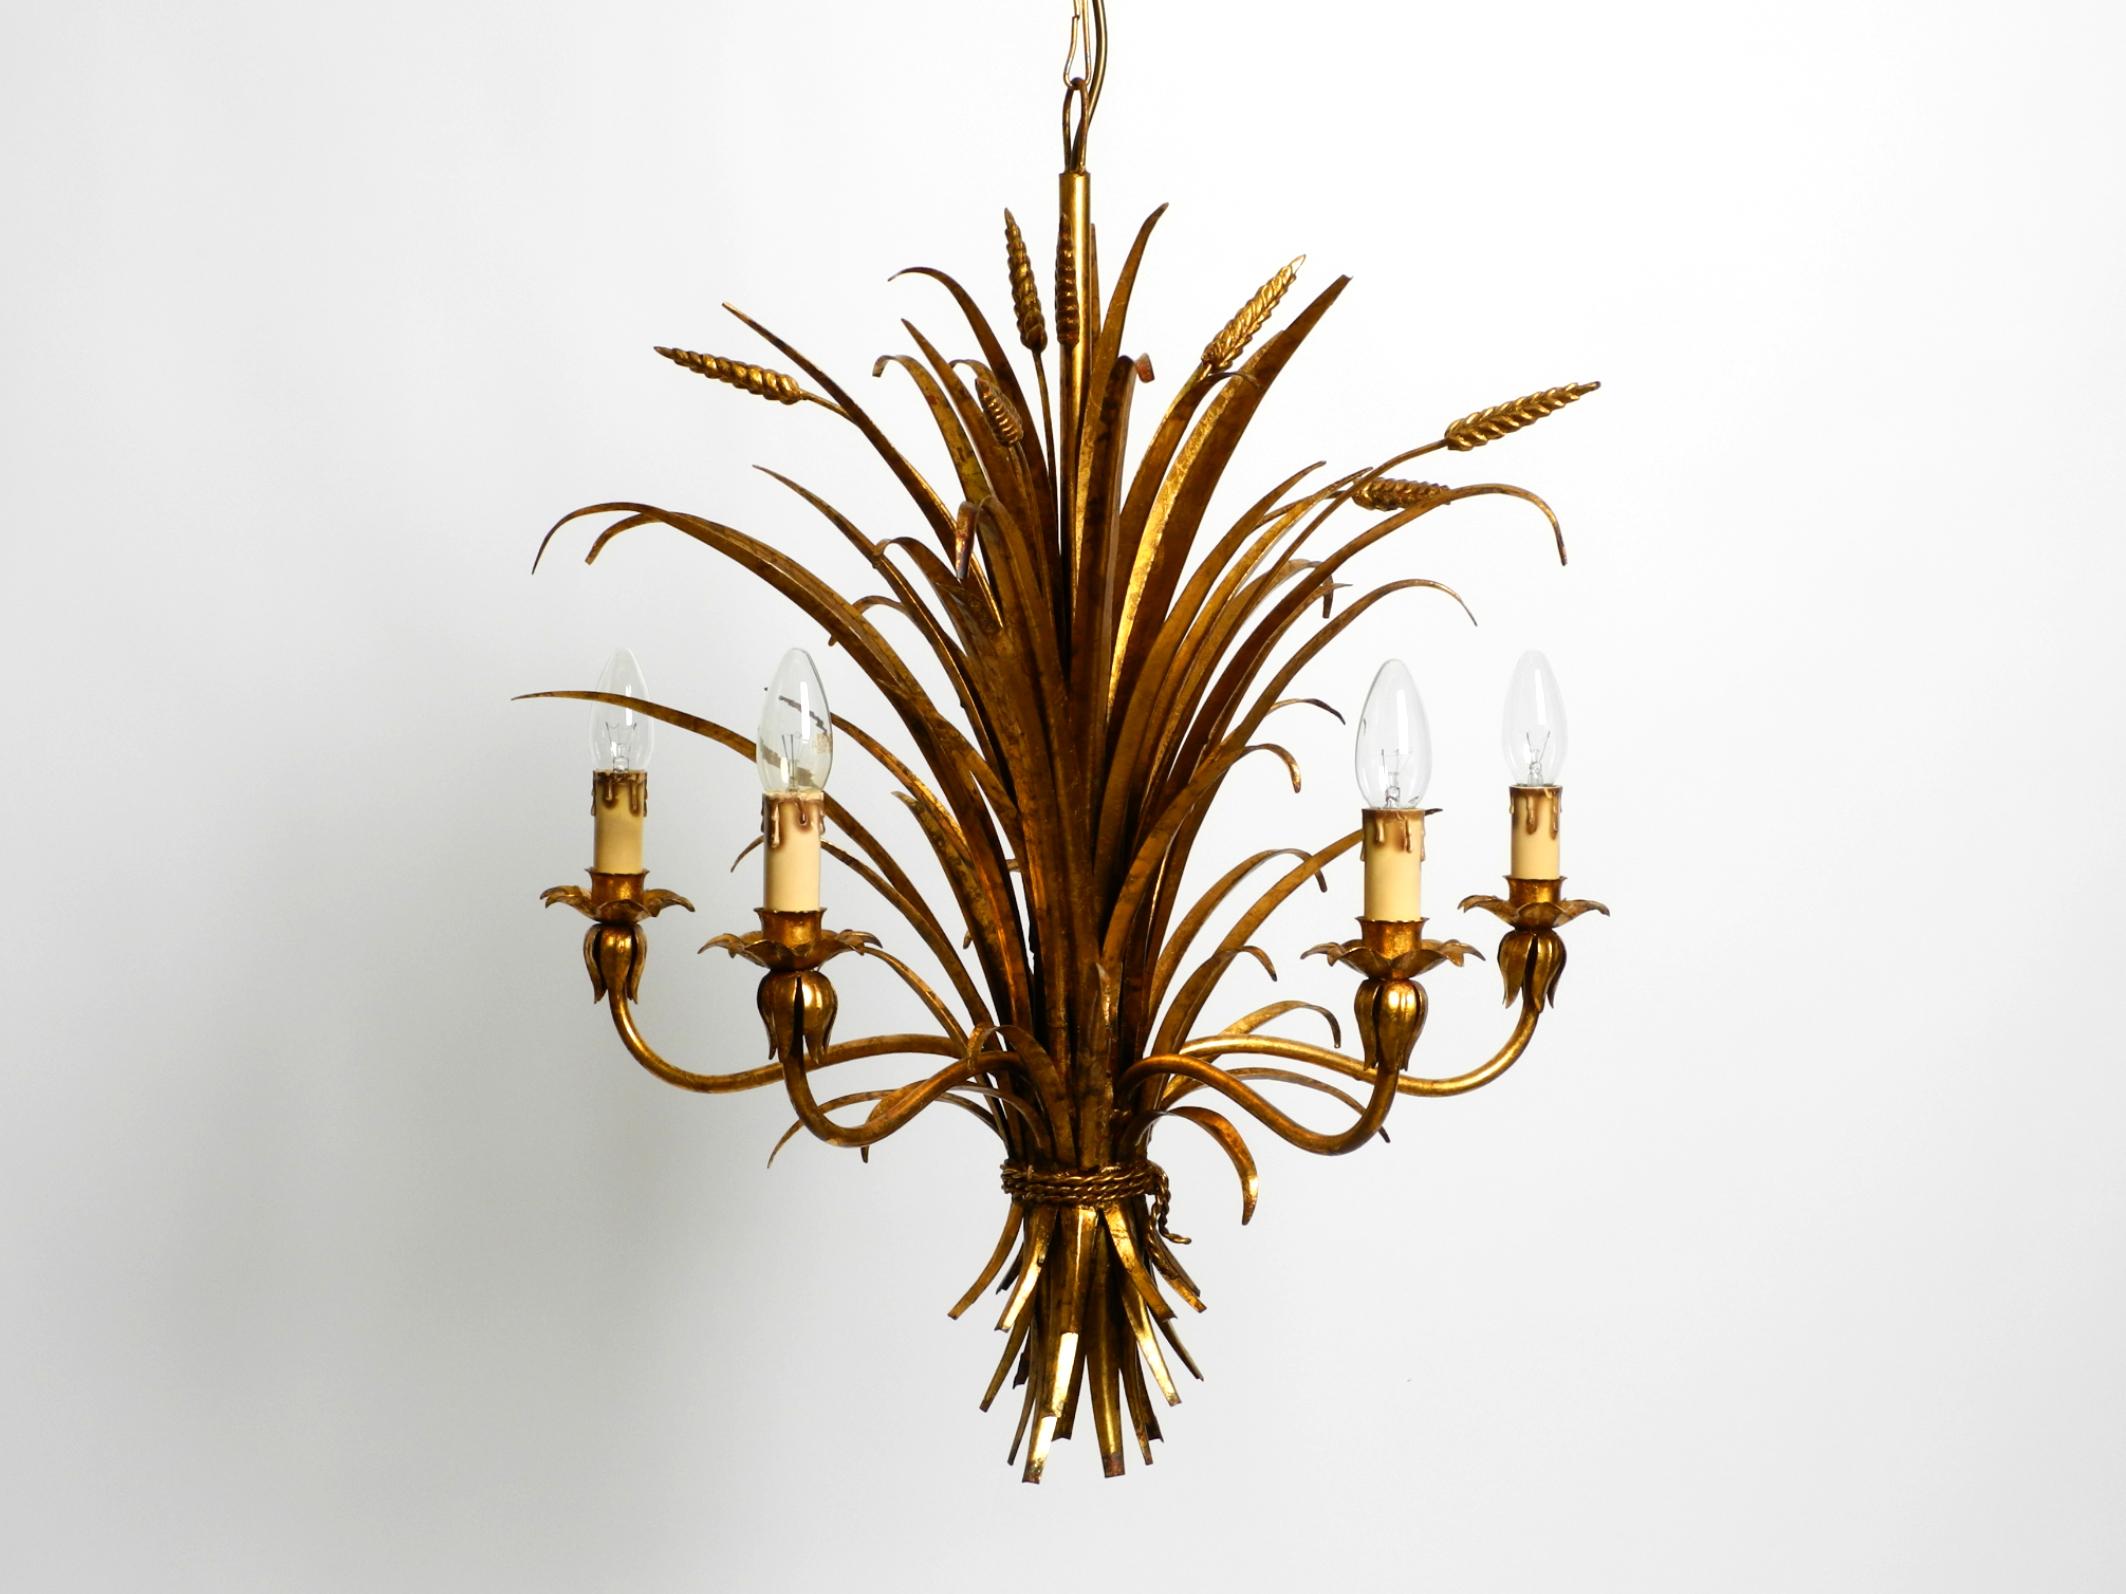 Beautiful 1970s gold-plated 5-arm tall metal chandelier by Hans Kögl.
Hans Kögl was a famous lighting and table designer. He worked with natural shapes such as palm leaves and other plant shapes. His designs were produced in both Germany and